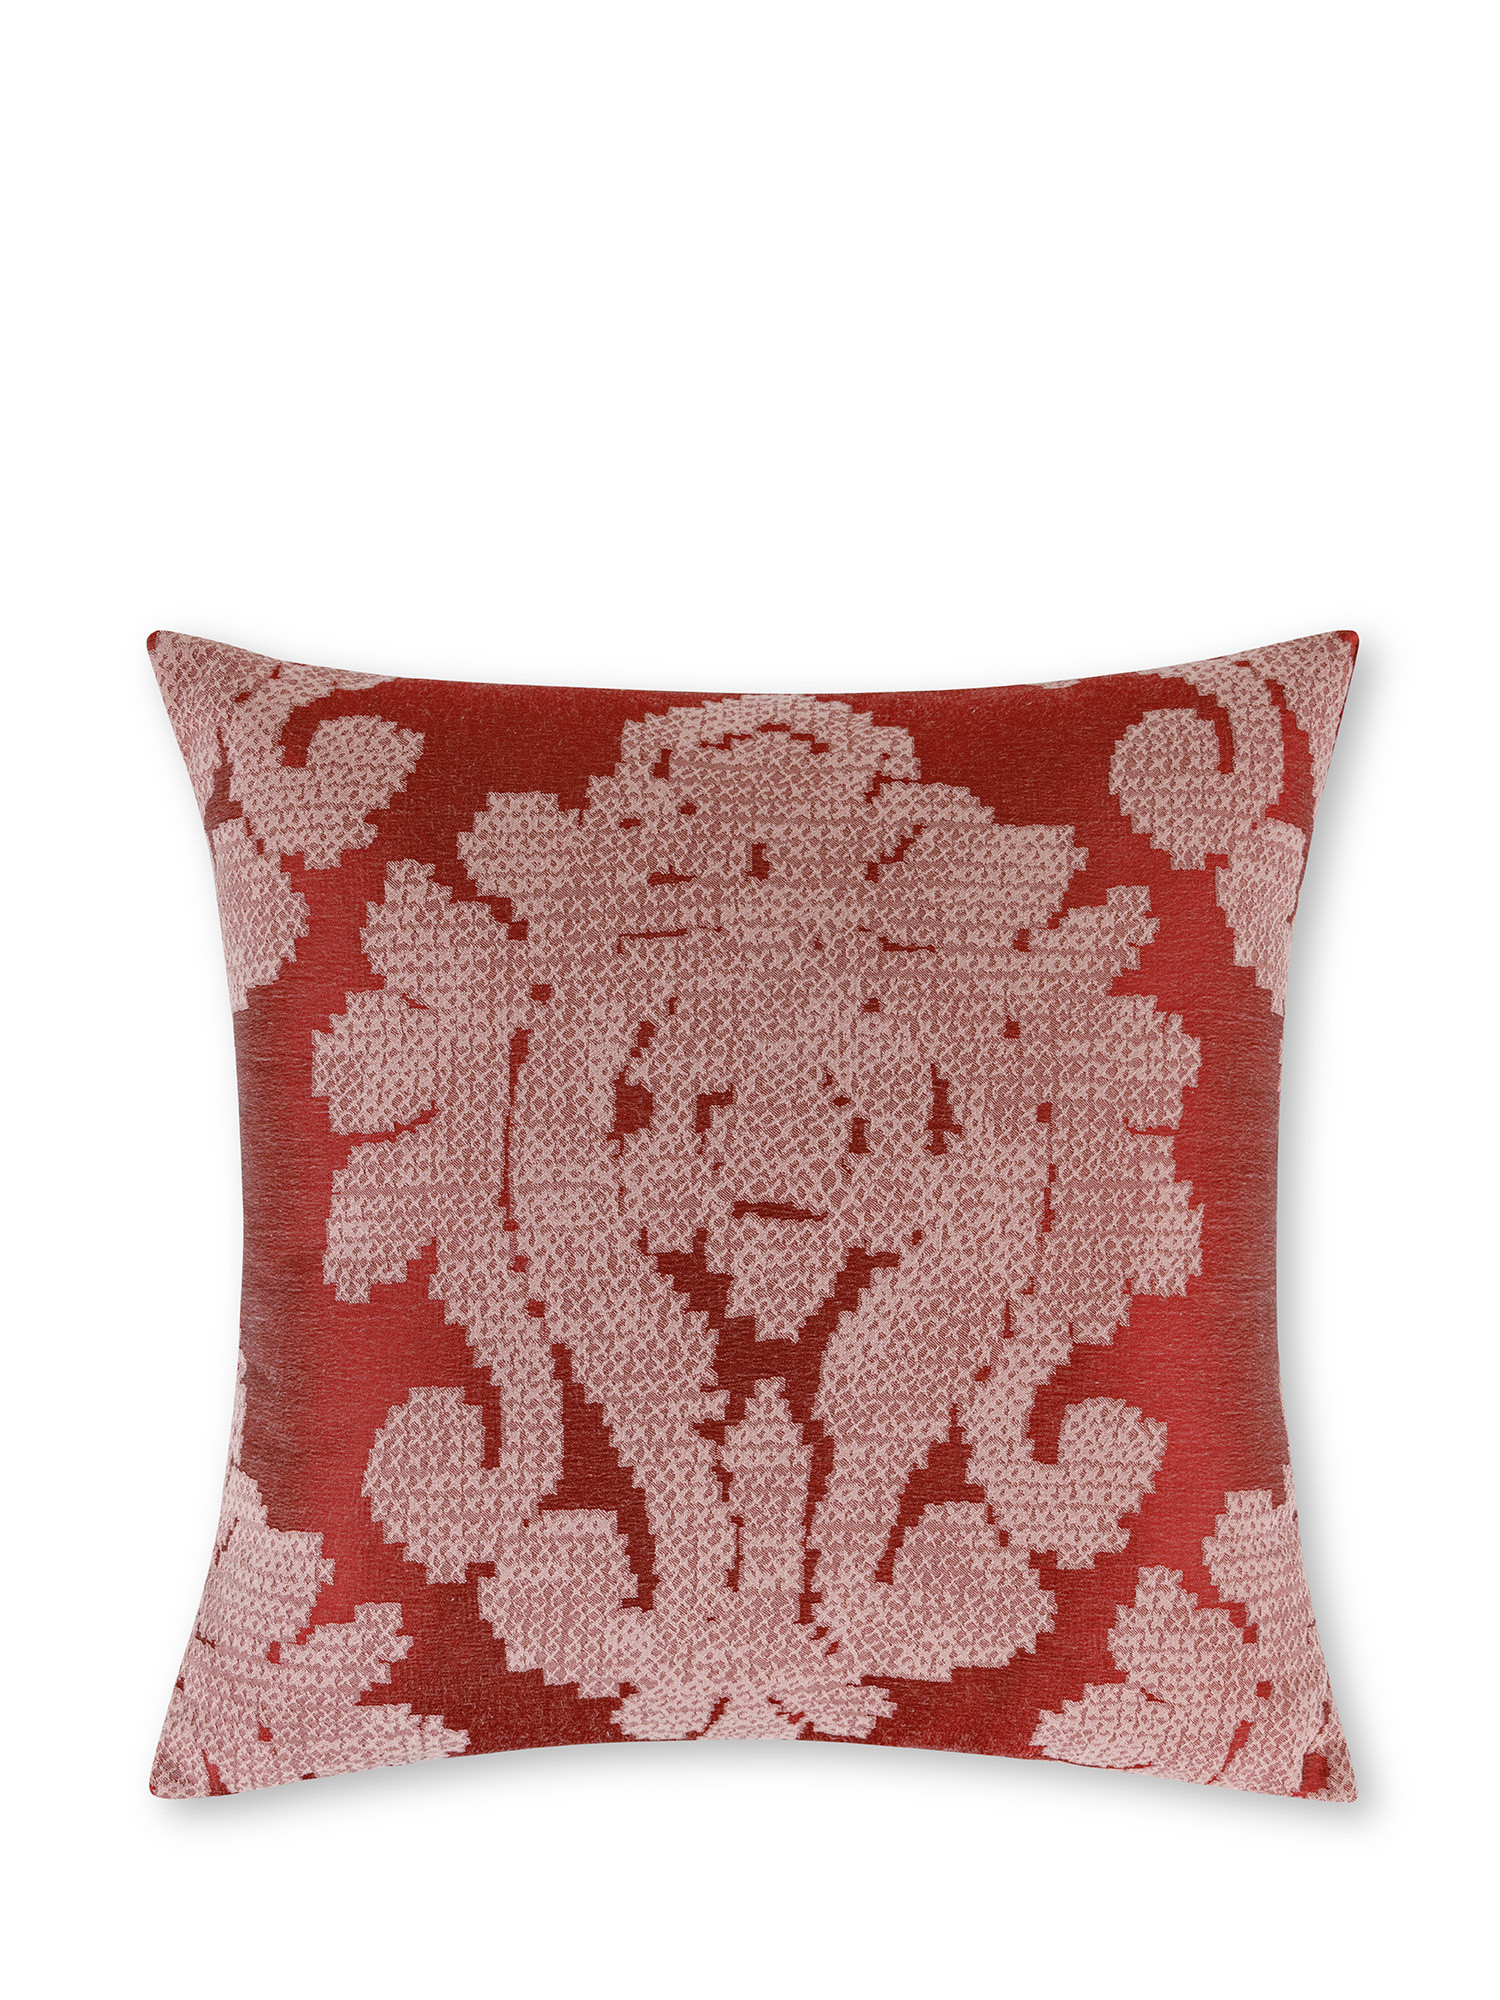 Cushion in plain color damask jacquard fabric 45x45 cm, Red, large image number 0